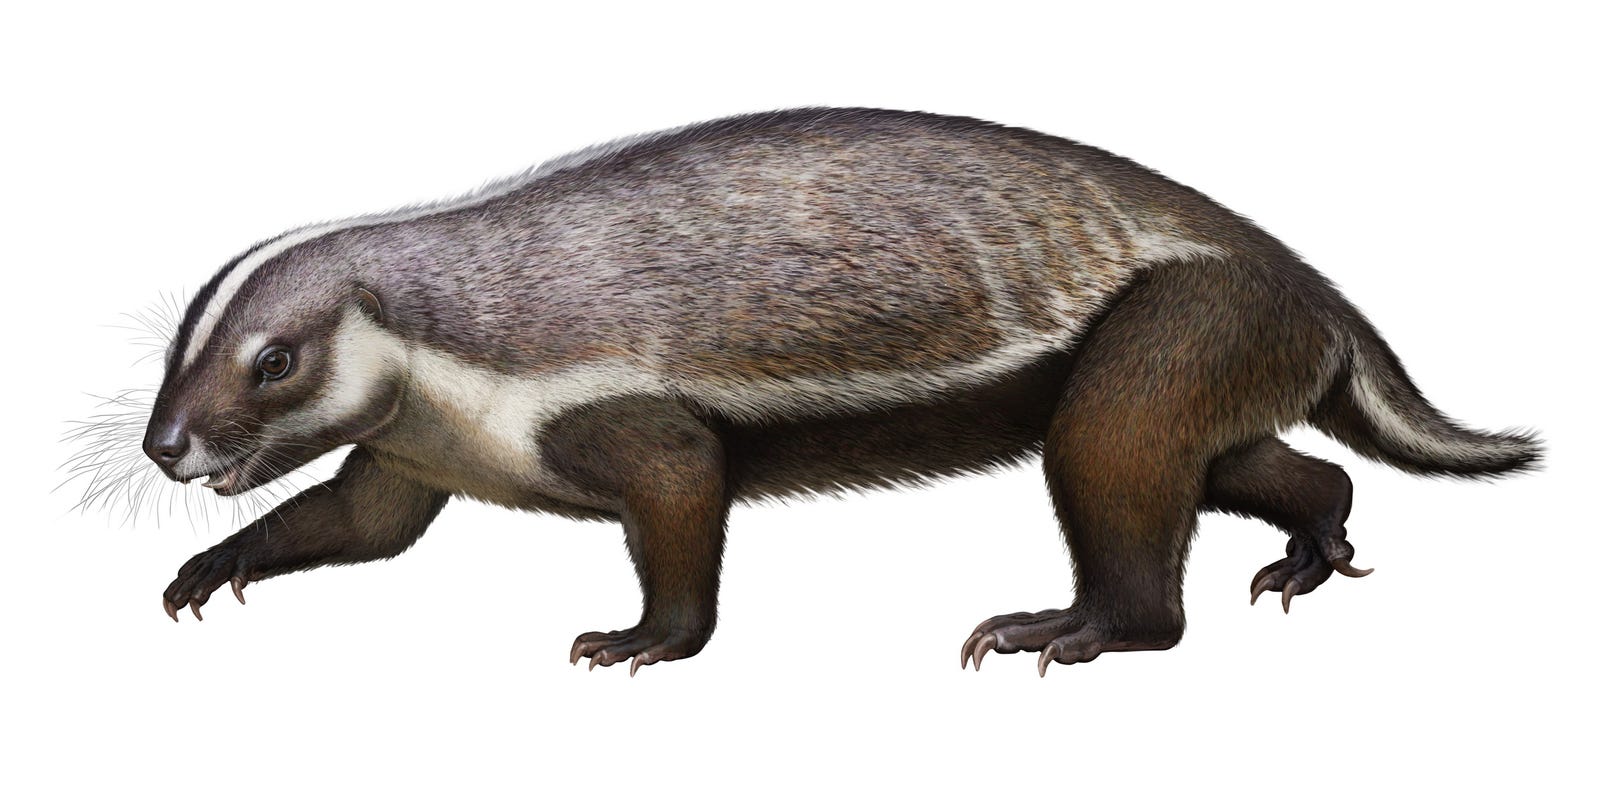 Fossil of Adalatherium hui, 'crazy beast' discovered in Madagascar